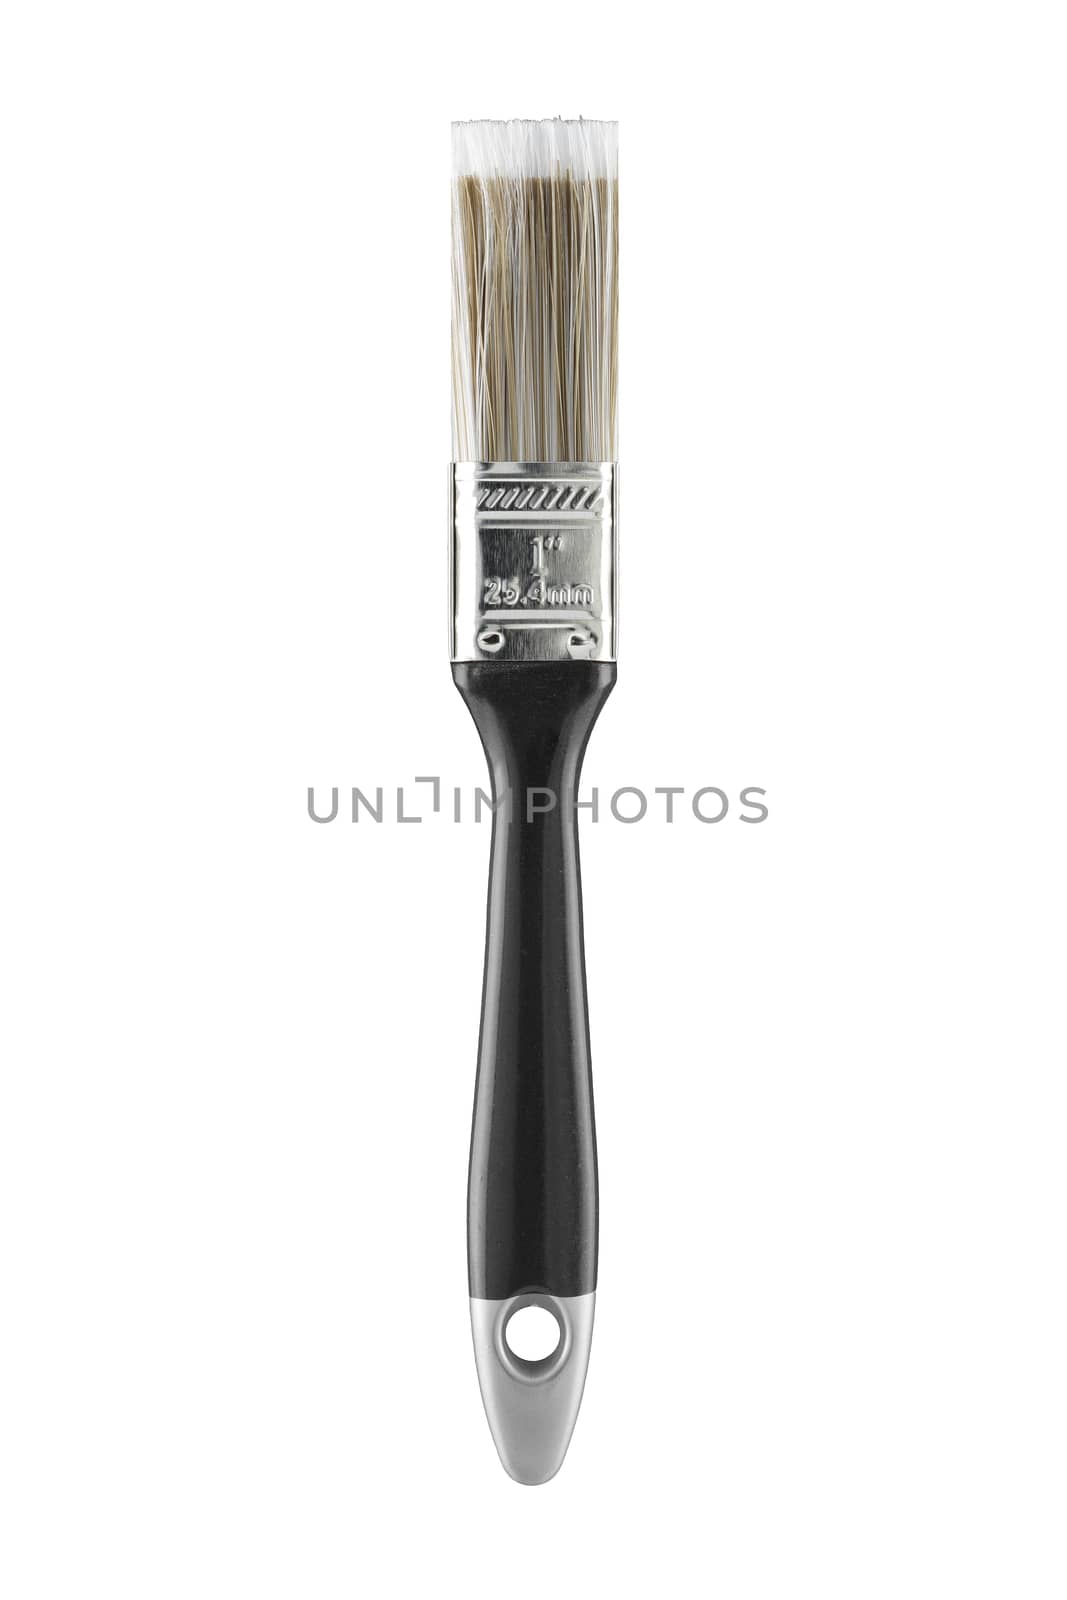 1" 25.4mm one inch decorators paint brush on white with clipping by VivacityImages